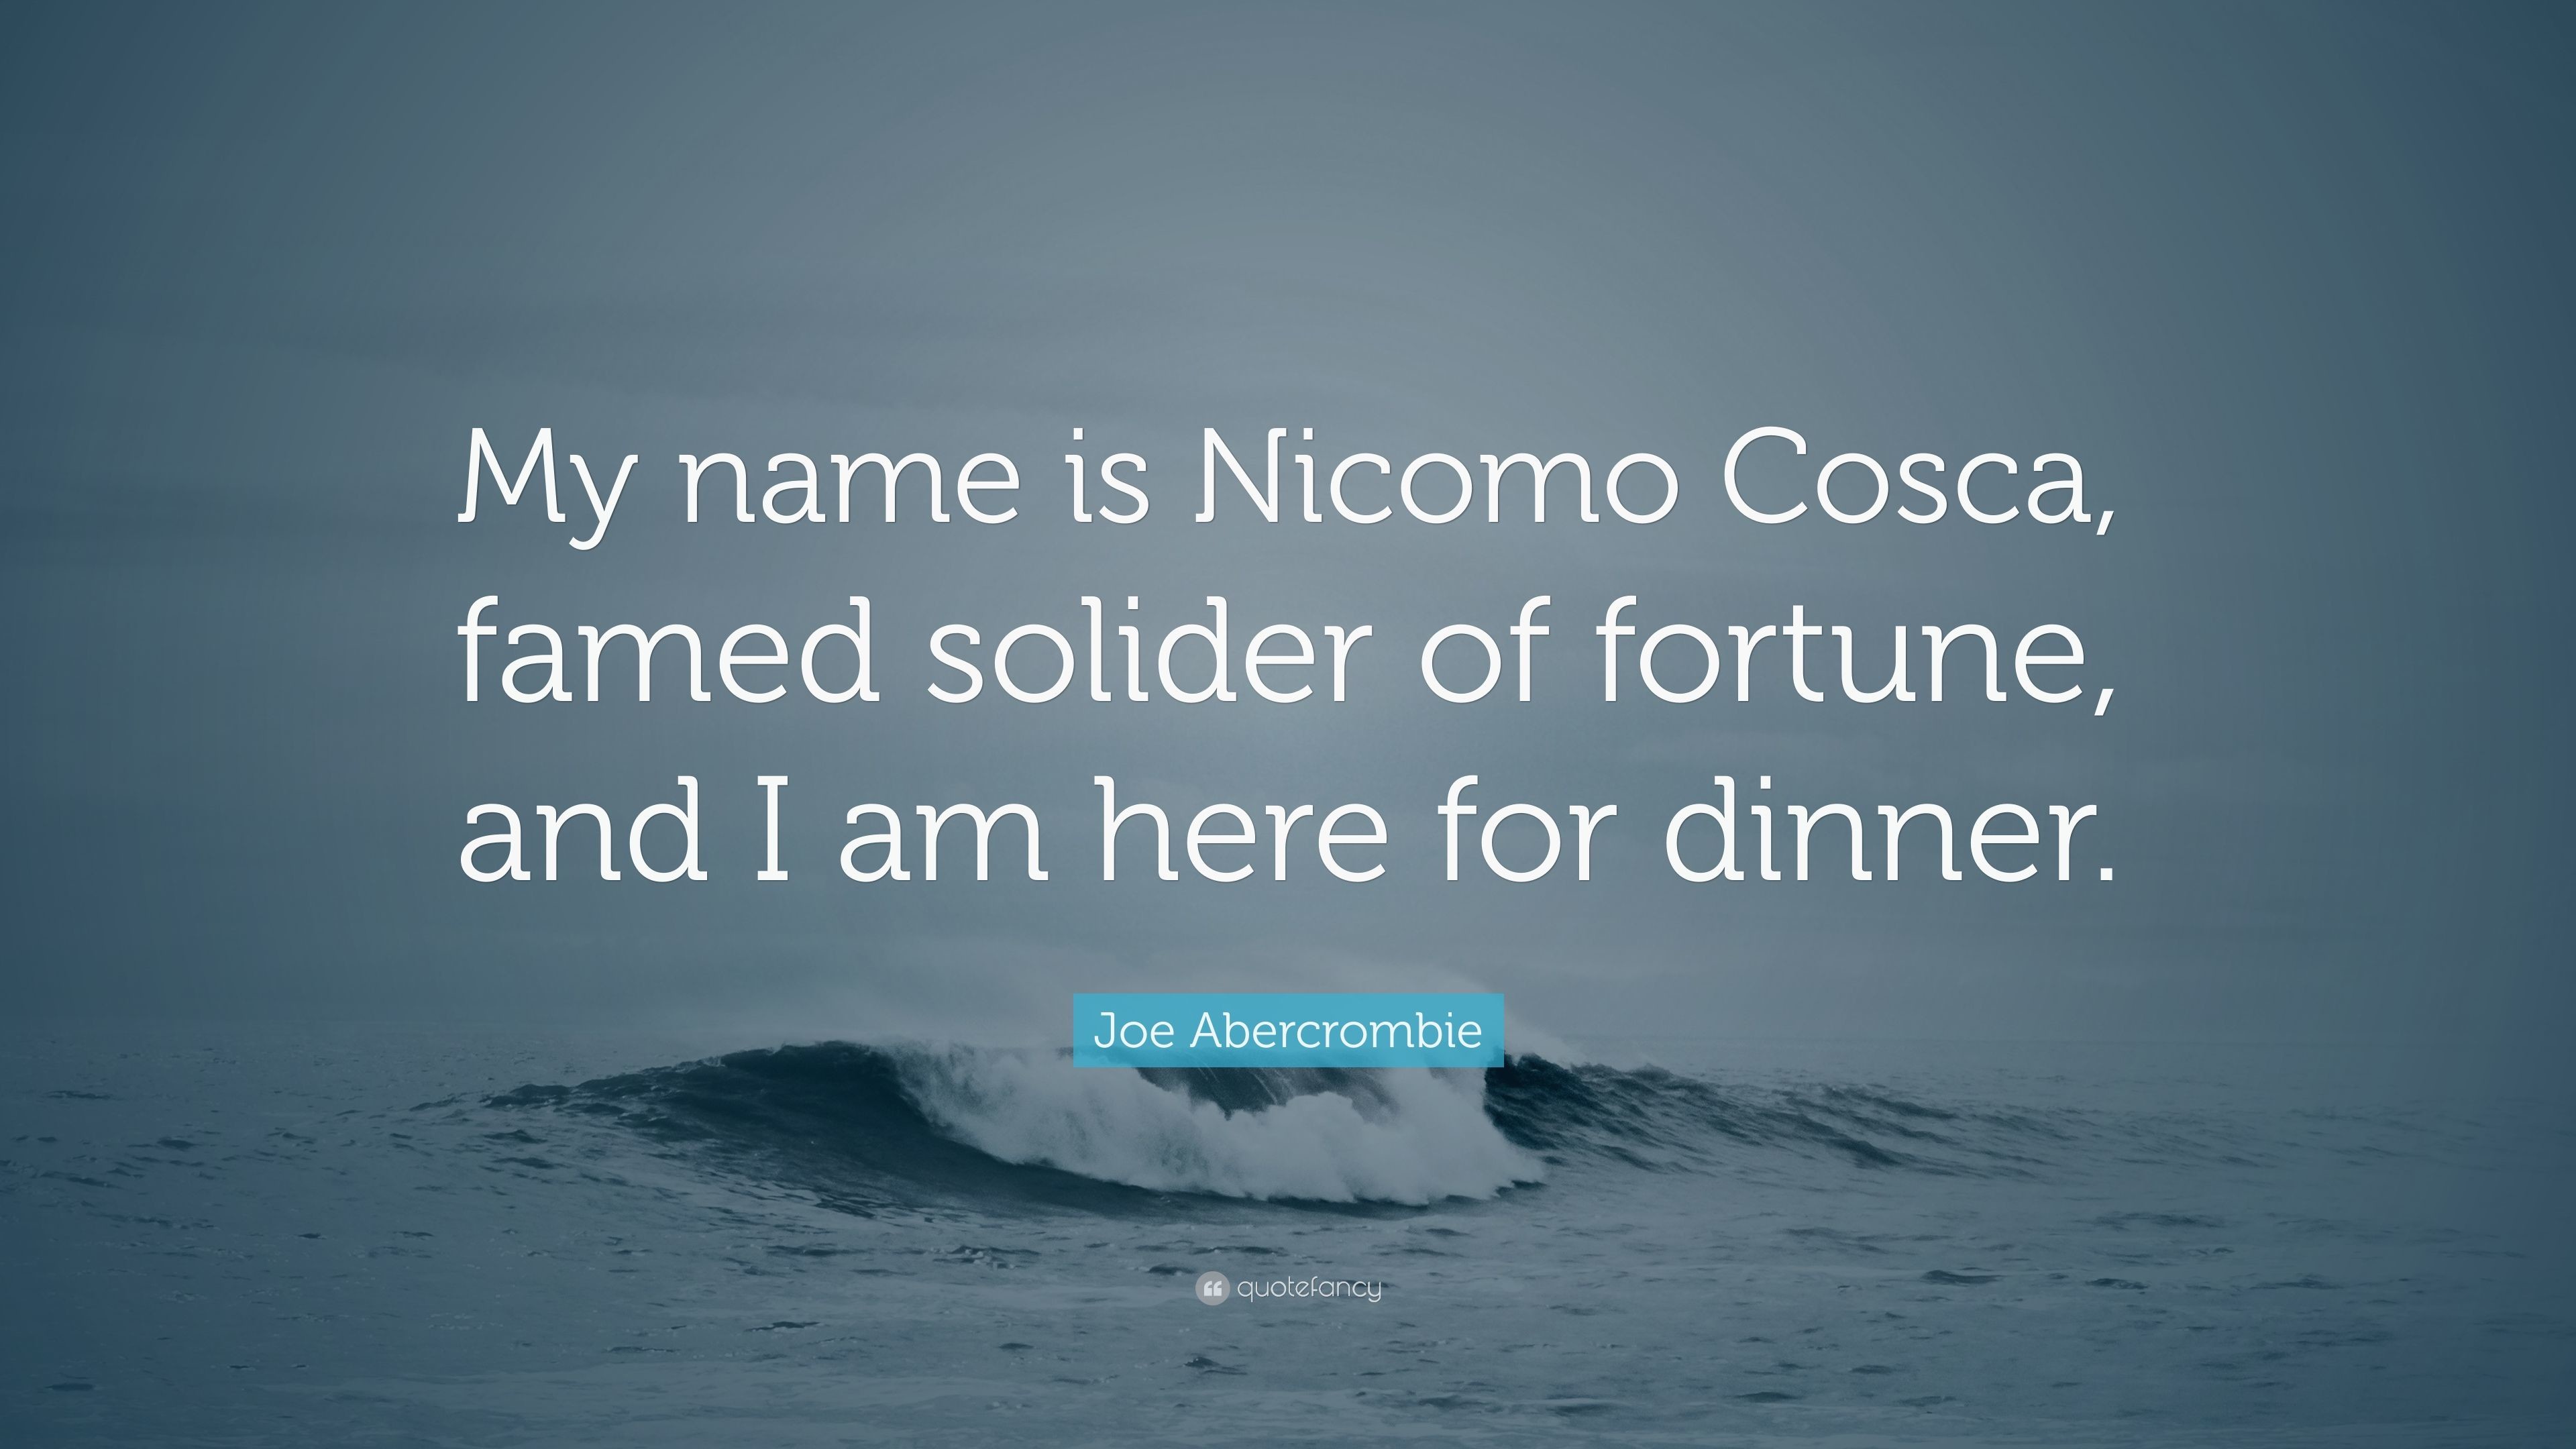 3840x2160 Joe Abercrombie Quote: “My name is Nicomo Cosca, famed solider of fortune,